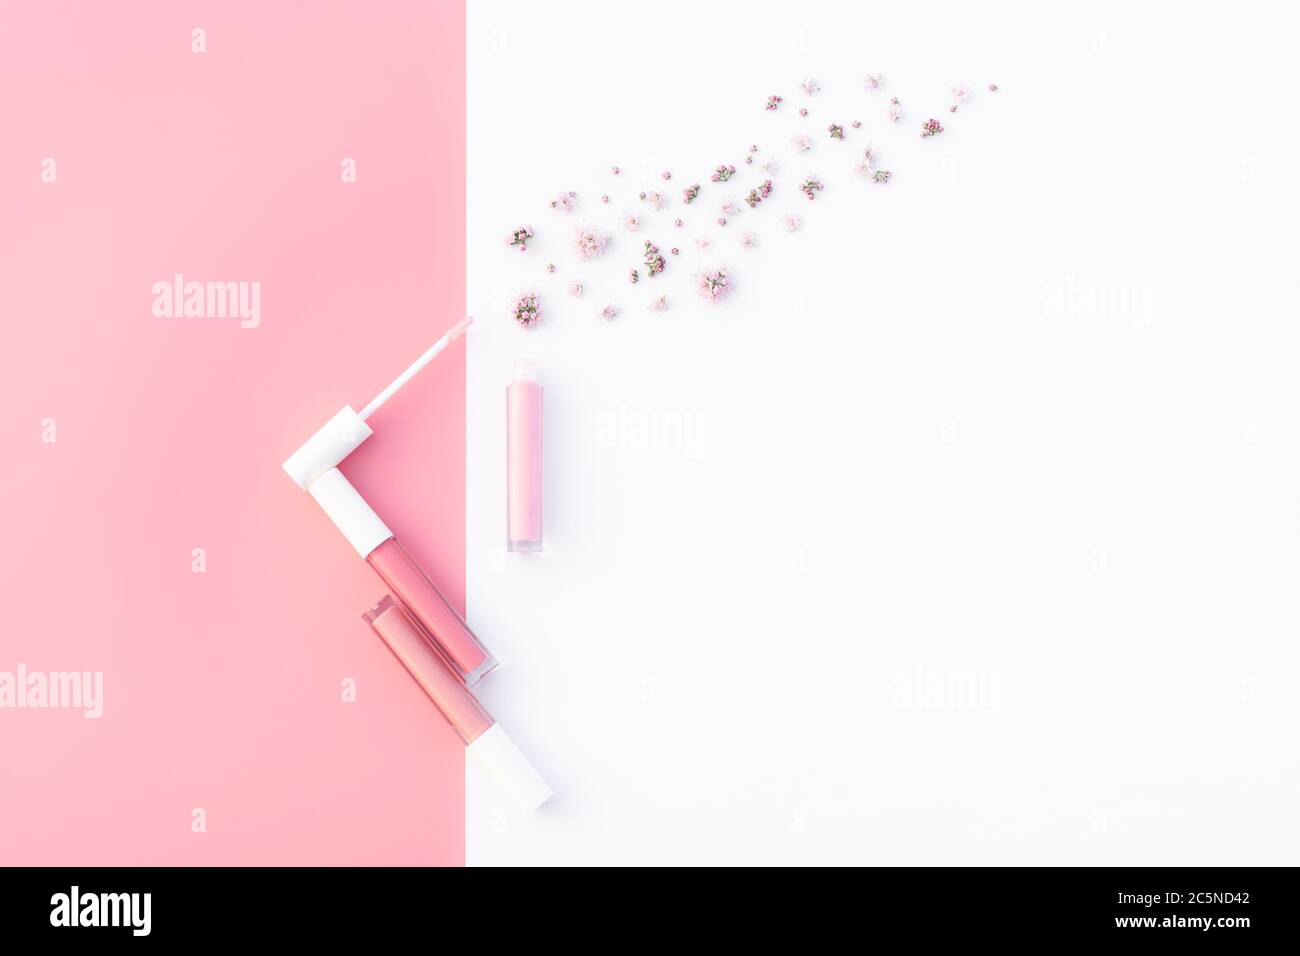 Download Trendy Design Template With Tender Pink Lip Gloss Layout One Opened With Small Flowers Decoration On Pastel Pink And White Background Flat Lay Style Copy Space Mockup For Your Design Stock Photo